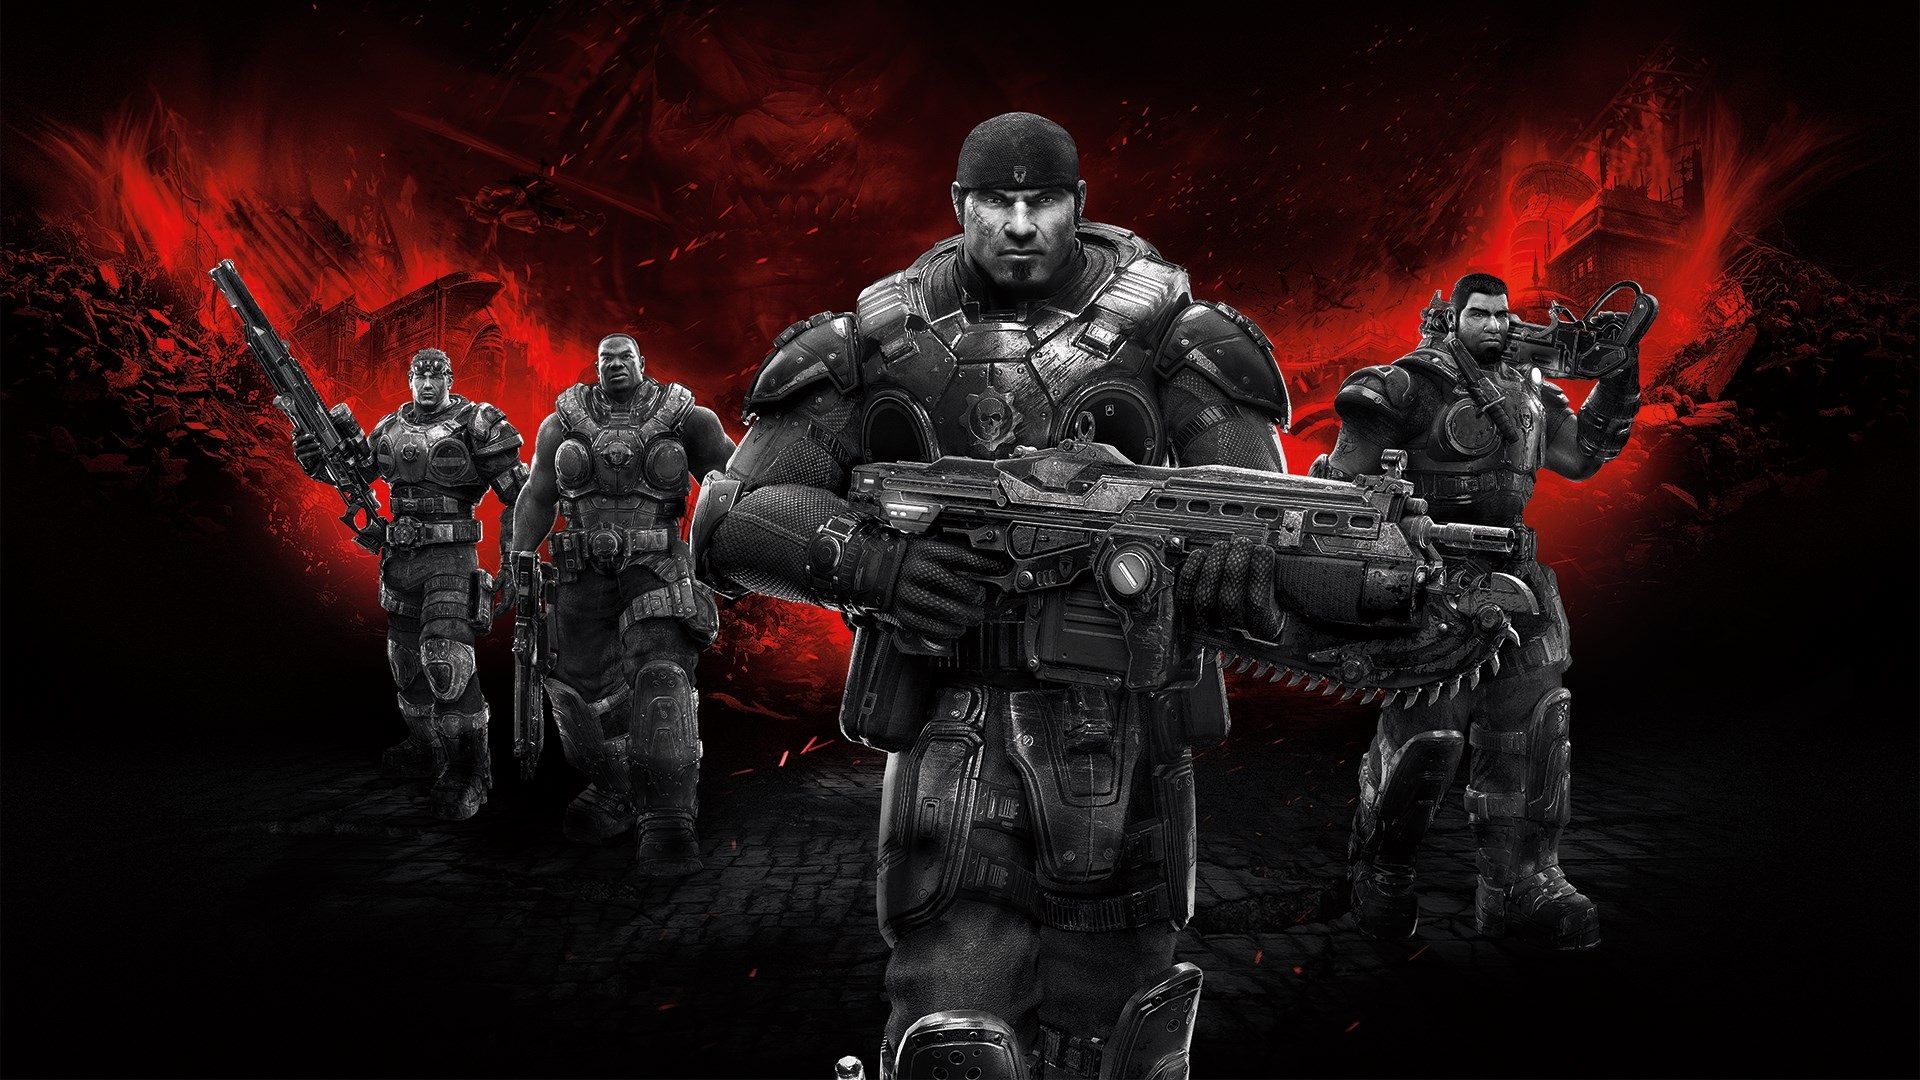 Key art for the original Gears of War game, with Marcus Fenix and his crew standing in a line